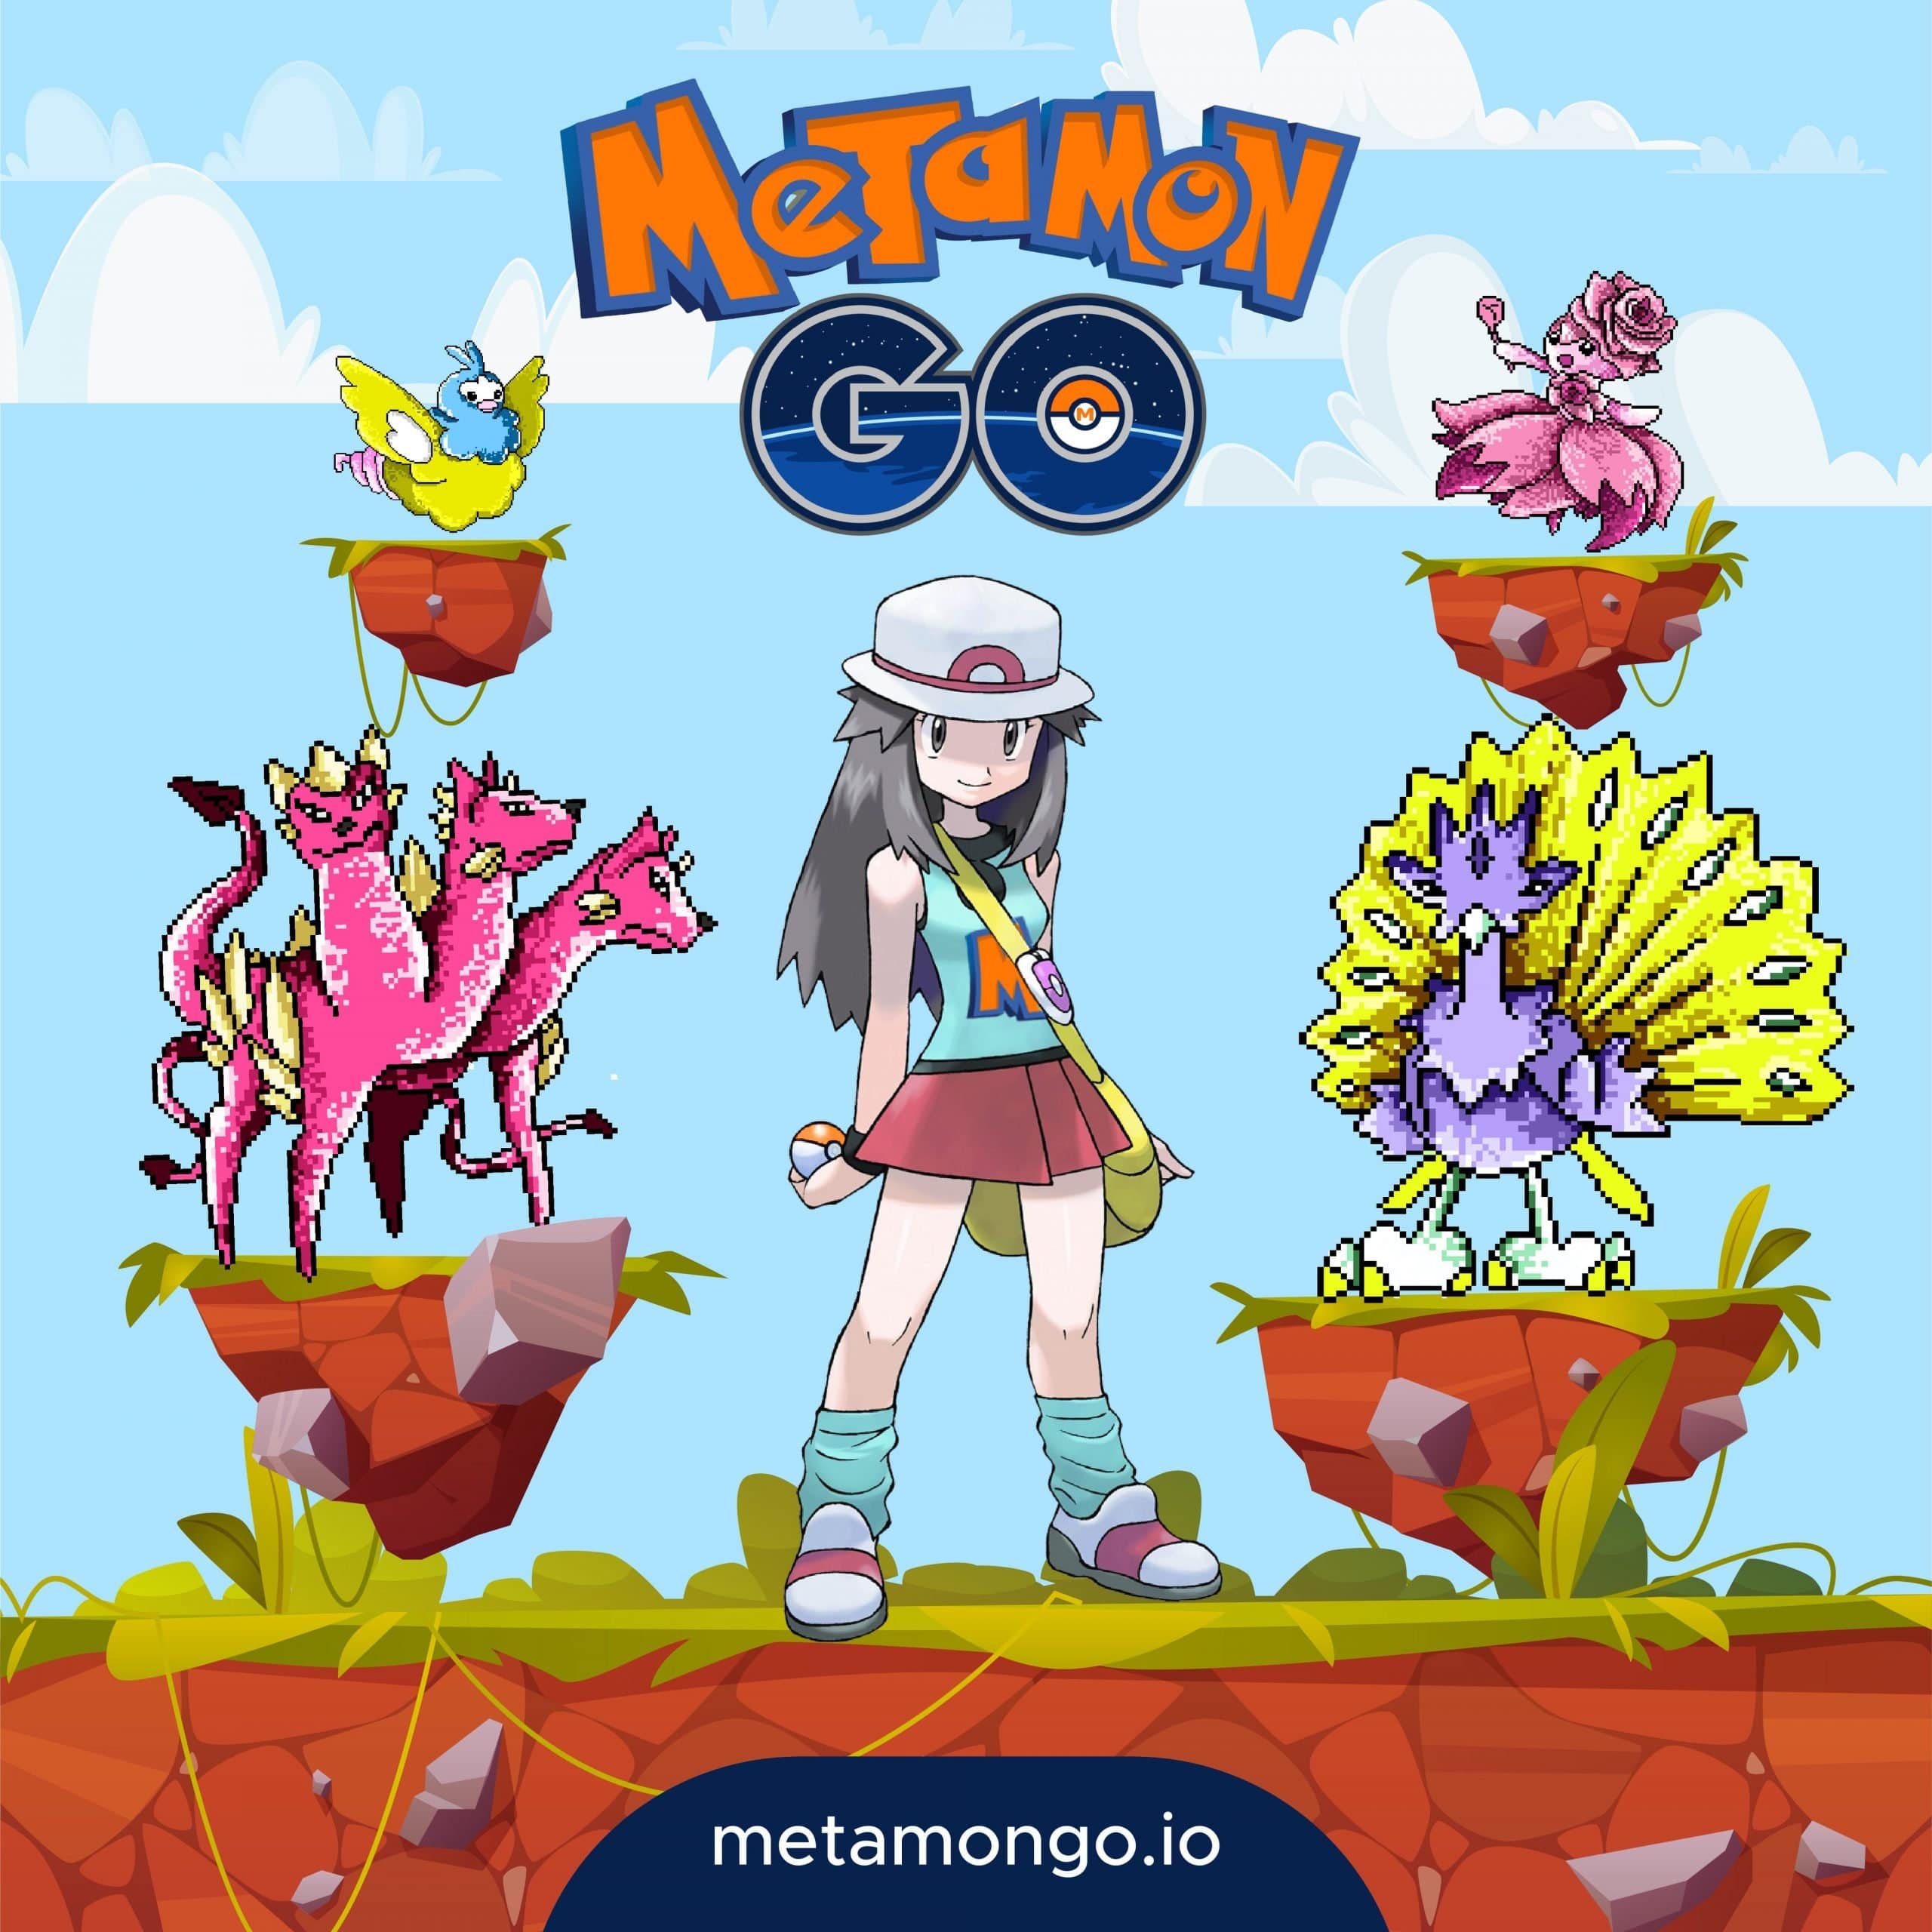 digital poster featuring the MEtamonGo game characters